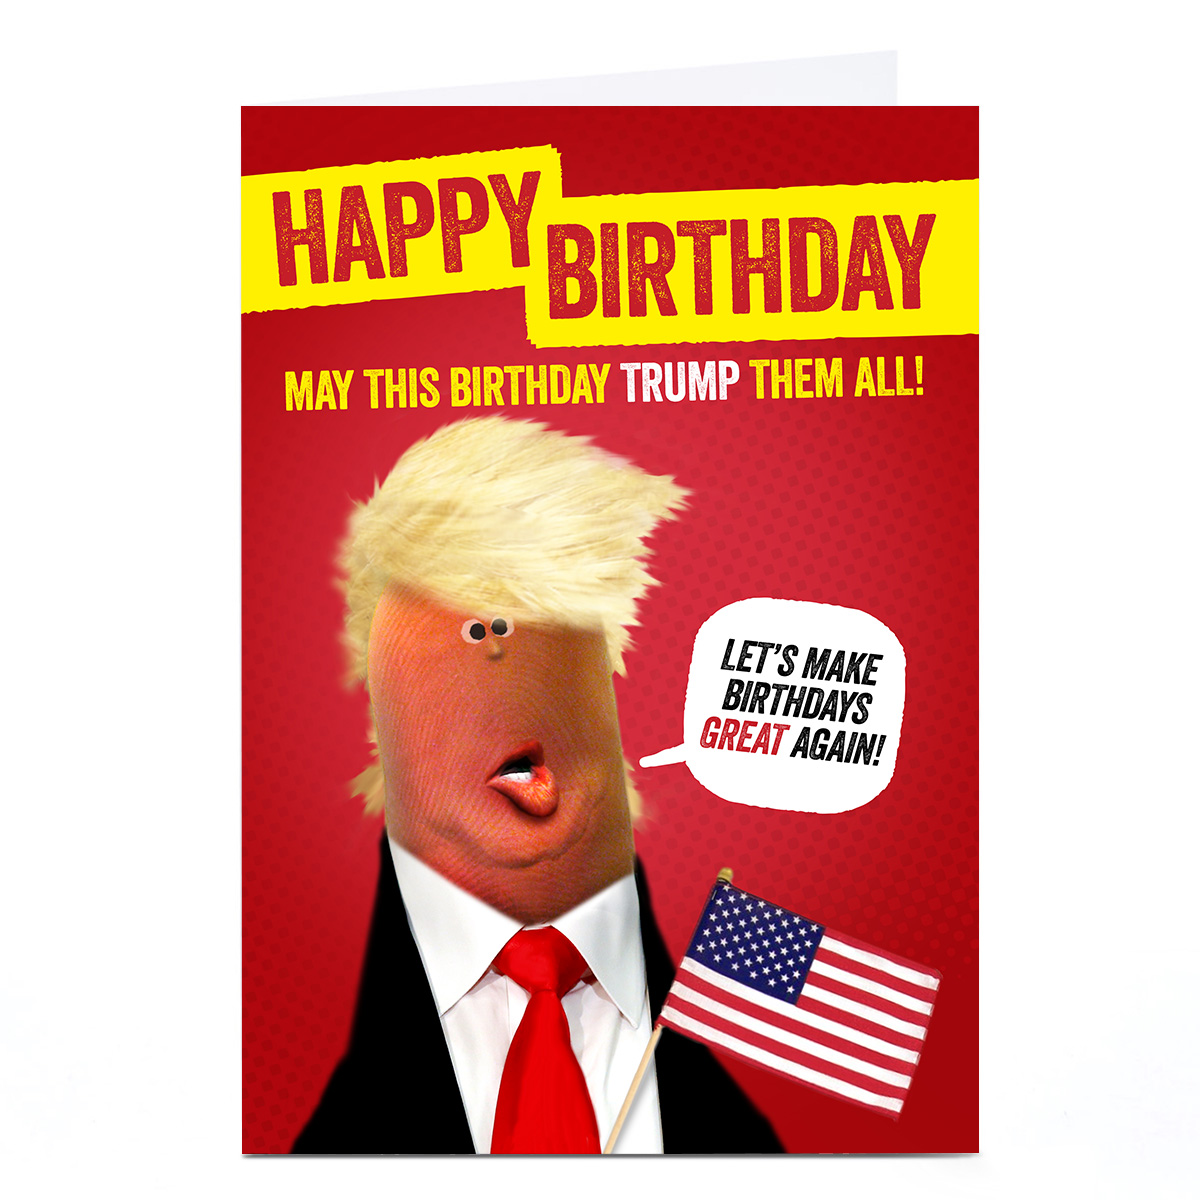 Personalised Finger Quips Birthday Card - May It Trump Them All